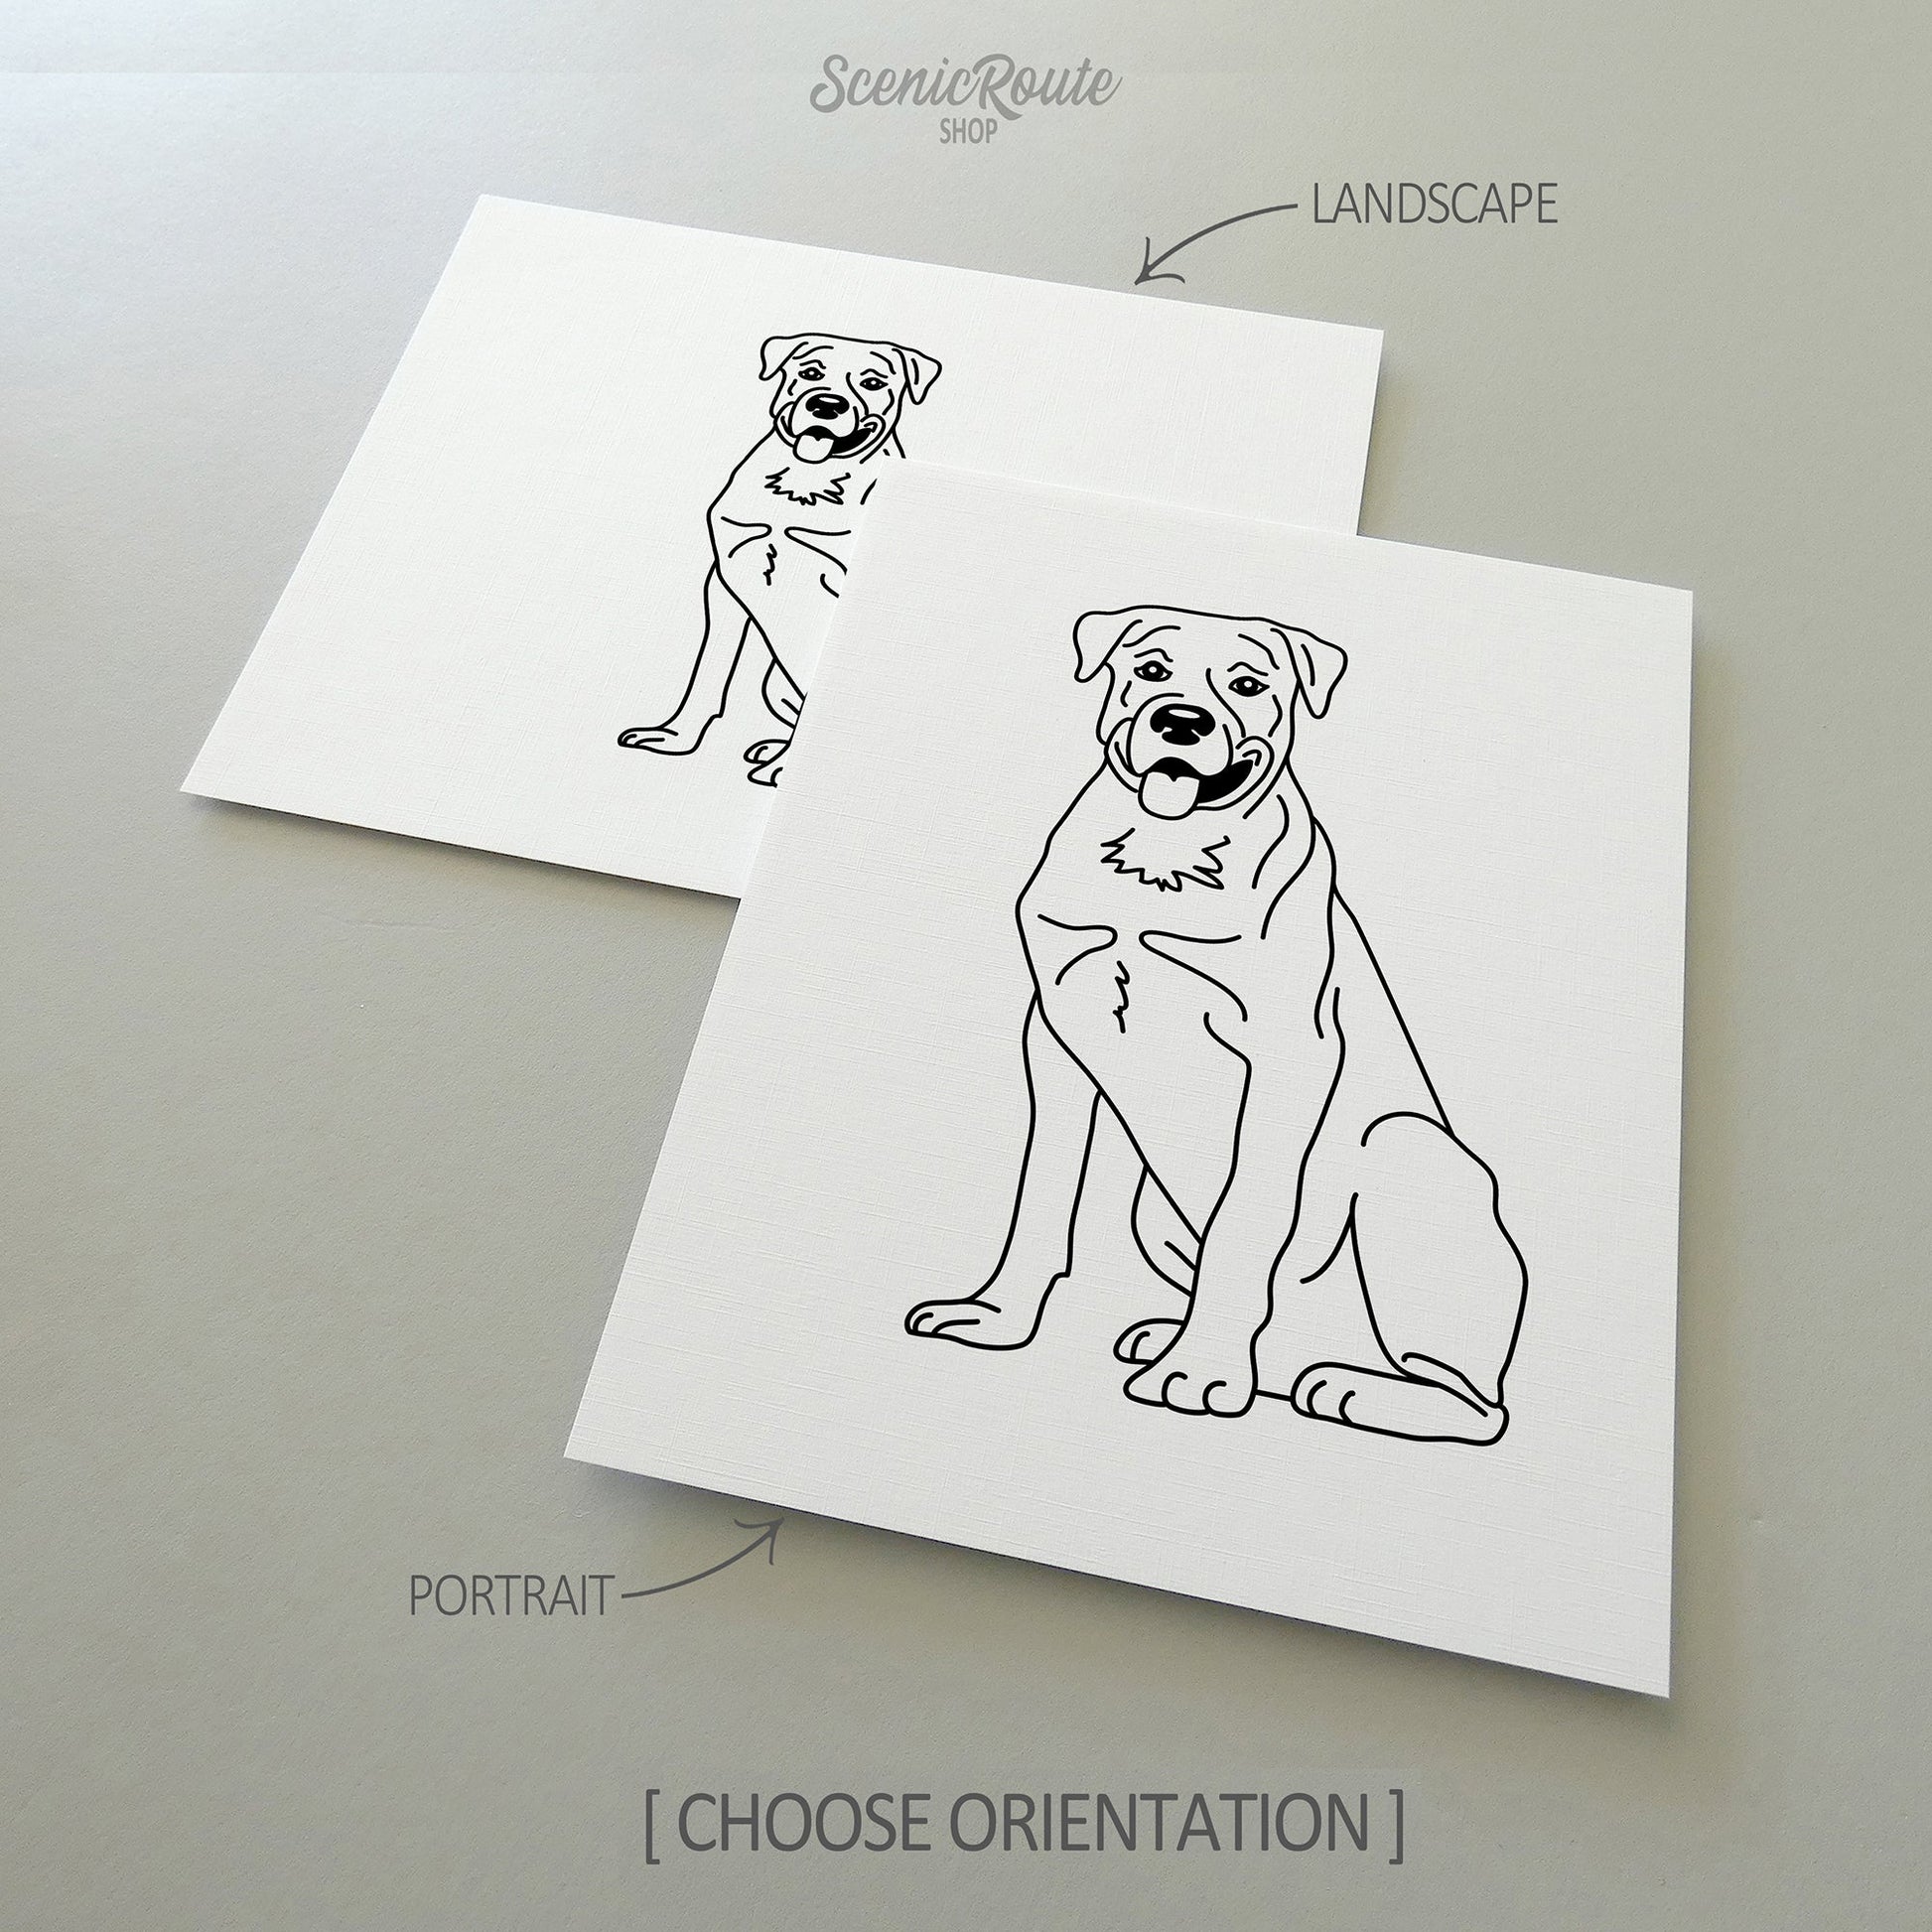 Two line art drawings of a Rottweiler dog on white linen paper with a gray background.  The pieces are shown in portrait and landscape orientation for the available art print options.